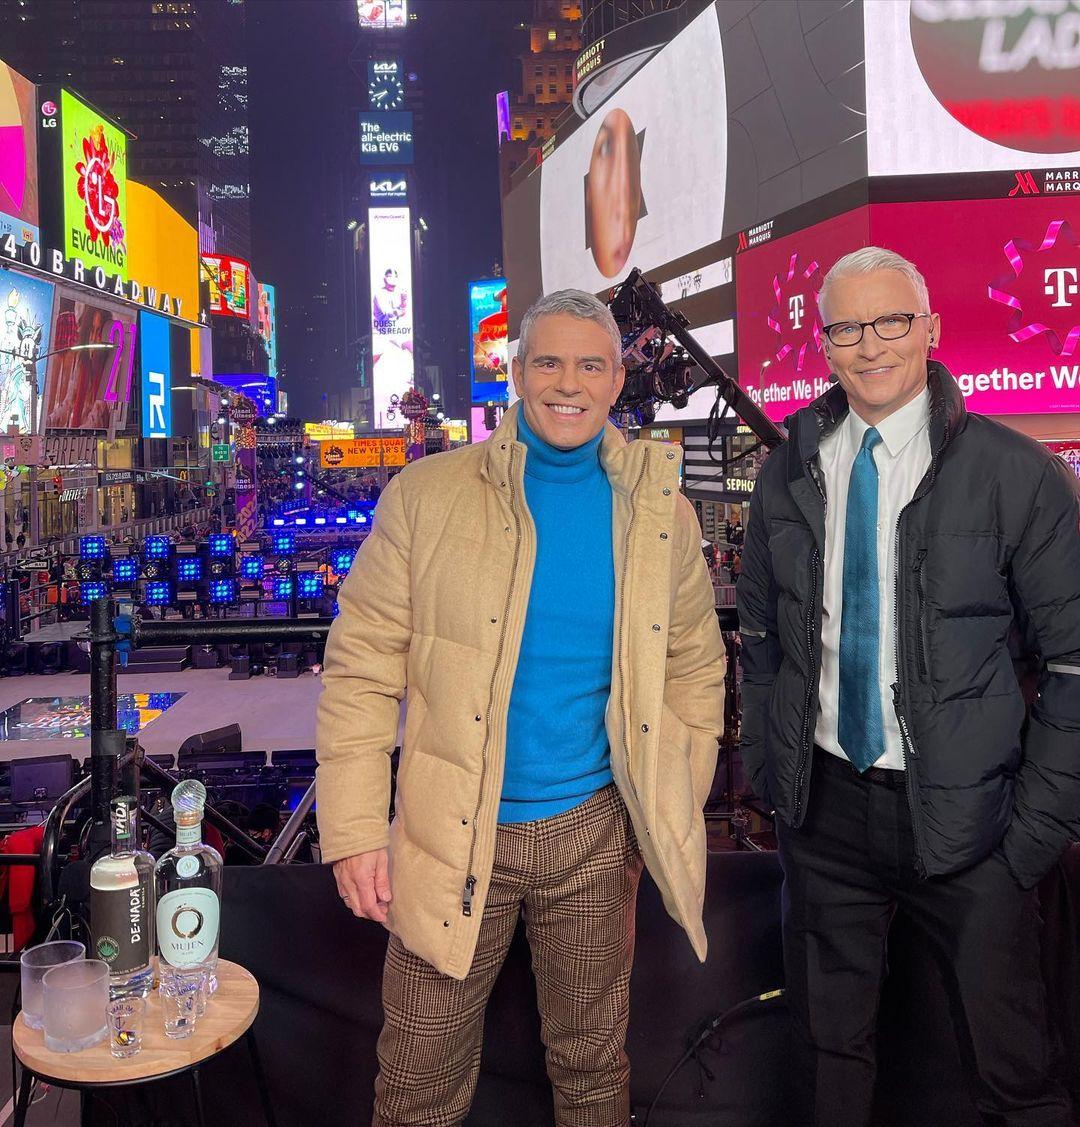 Anderson Cooper and Andy Cohen